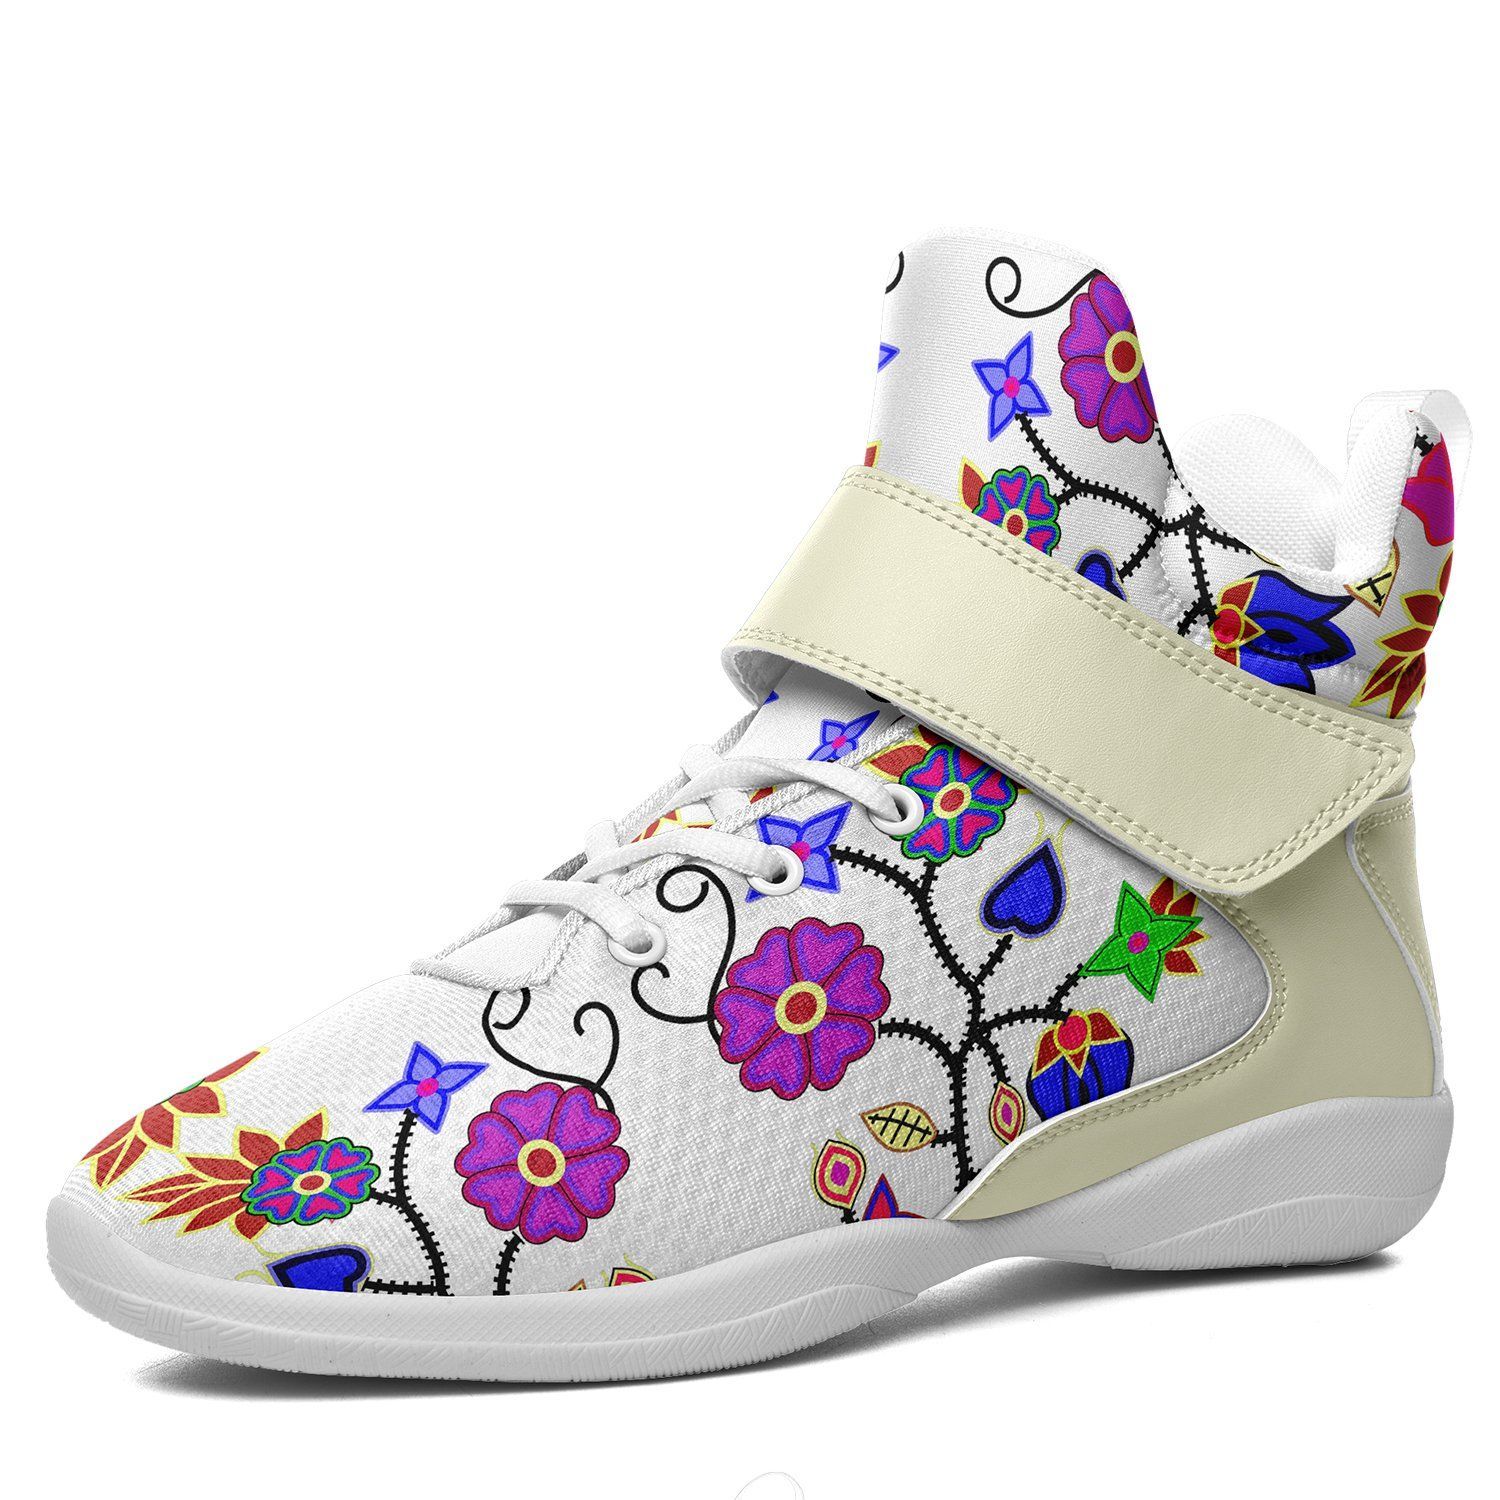 Floral Beadwork Seven Clans White Kid's Ipottaa Basketball / Sport High Top Shoes 49 Dzine US Child 12.5 / EUR 30 White Sole with Cream Strap 